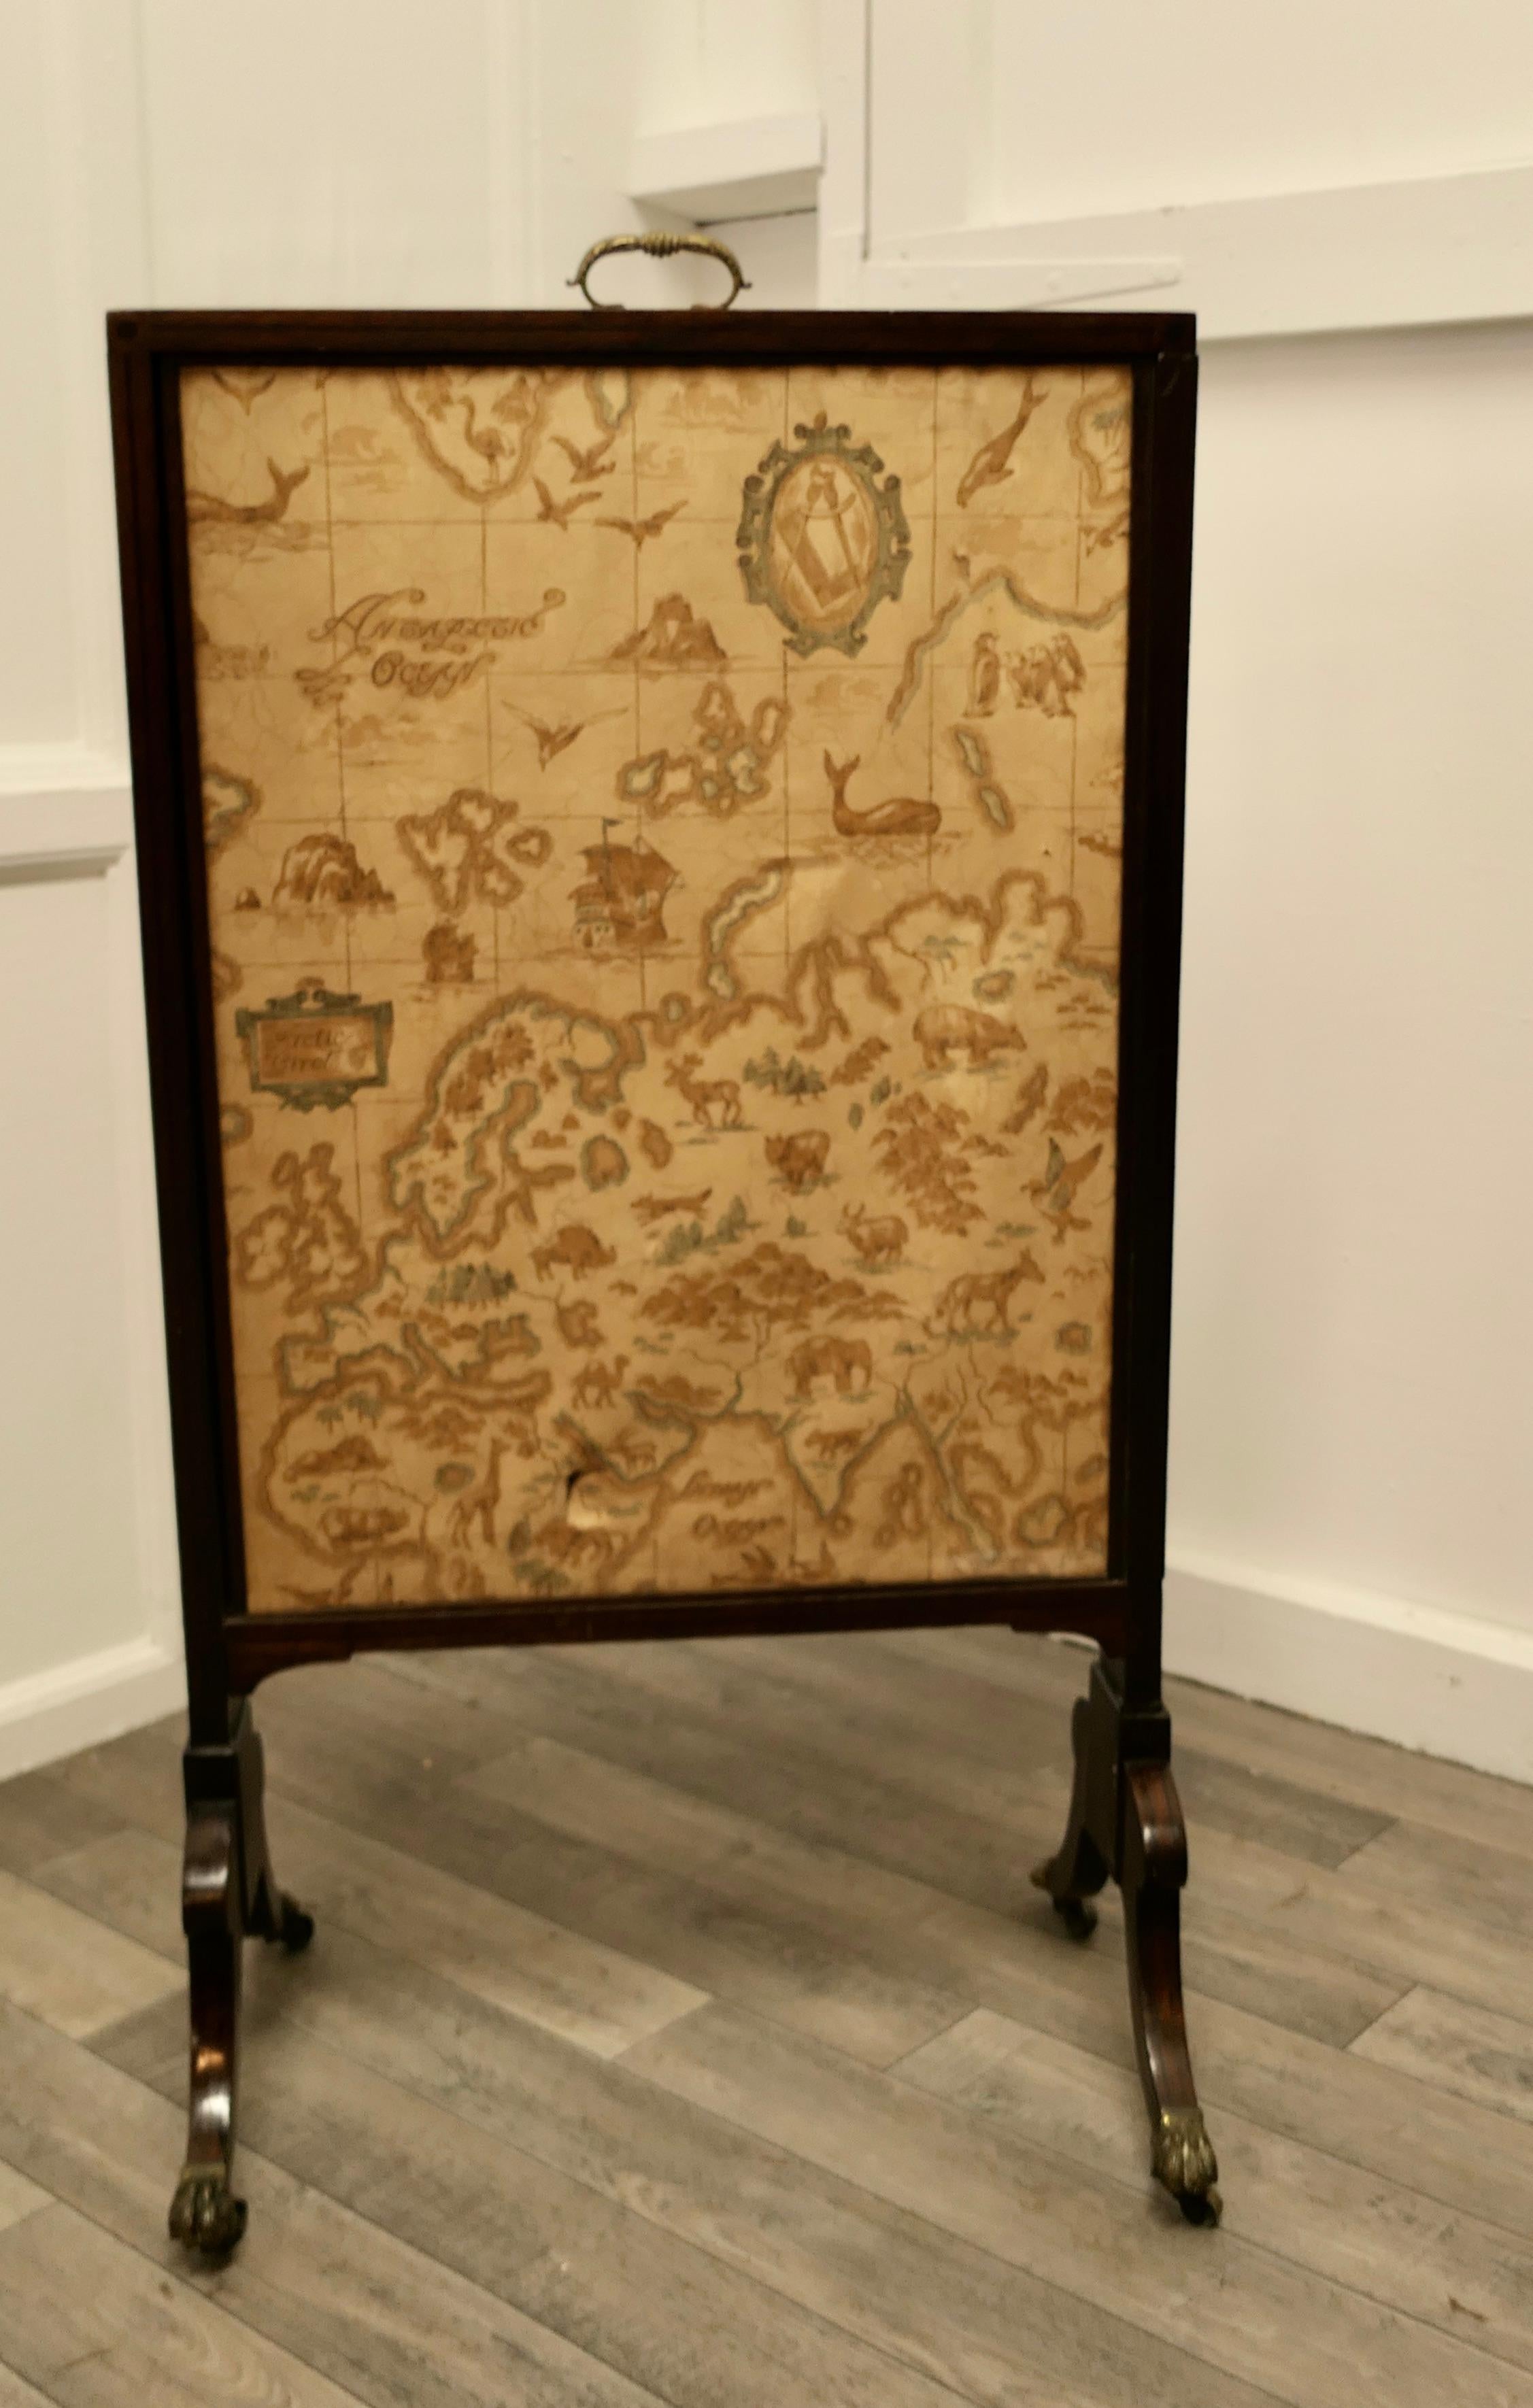 A triple extending fire screen of Northern Hemisphere Map

A wonderful piece the screen has 3 double sided silk panels printed with Northern Hemisphere Mapping
There are a few thin tears in the silk otherwise a very rare and interesting